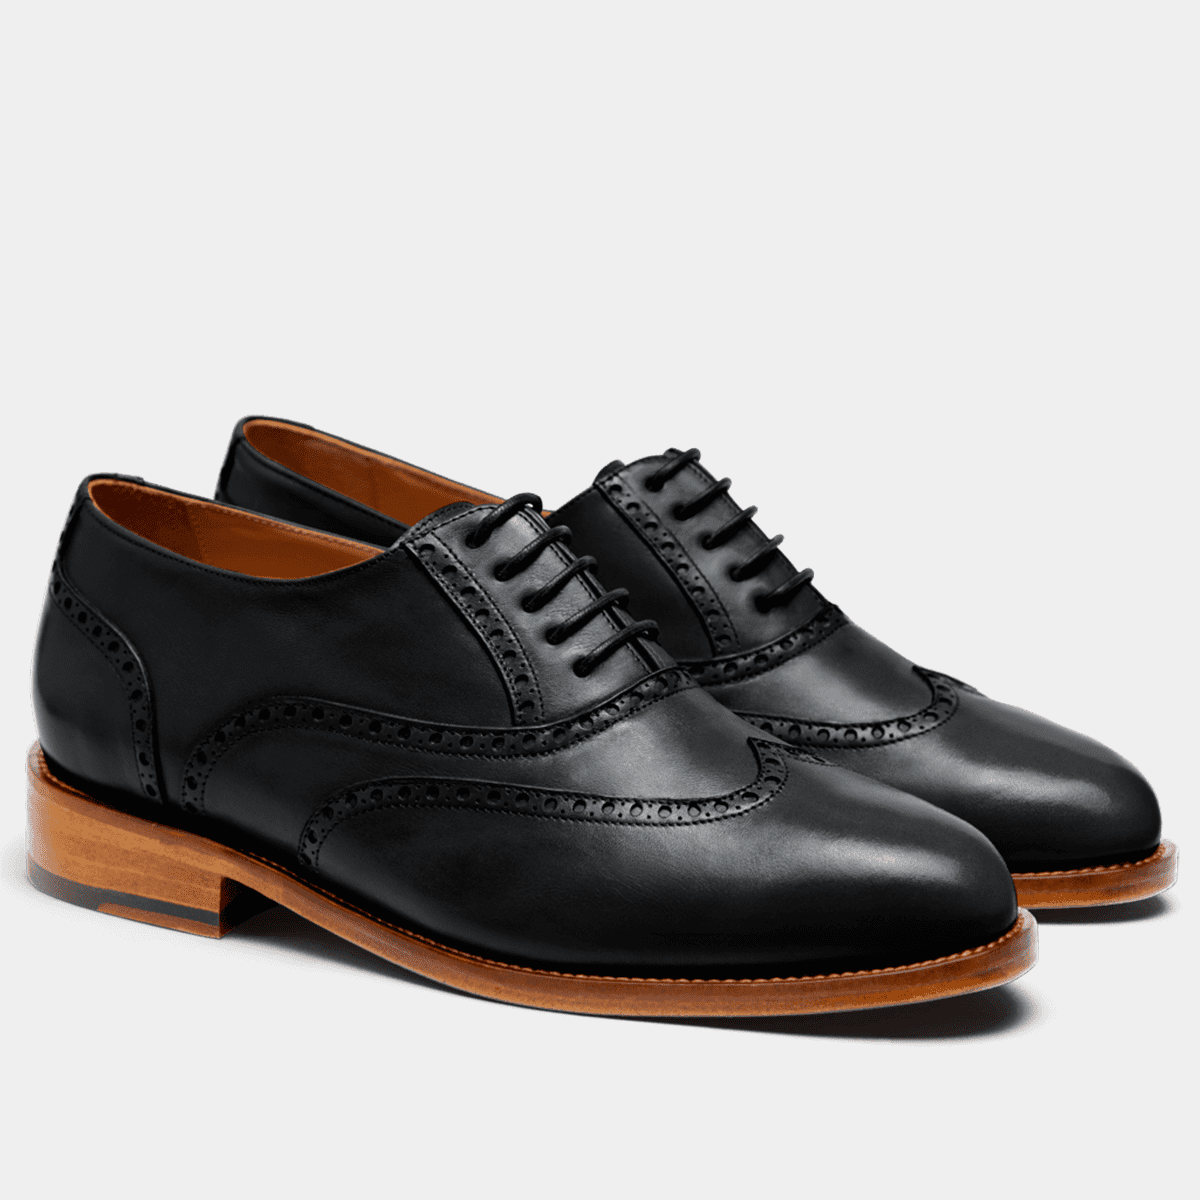 Introduction to Oxford Shoes